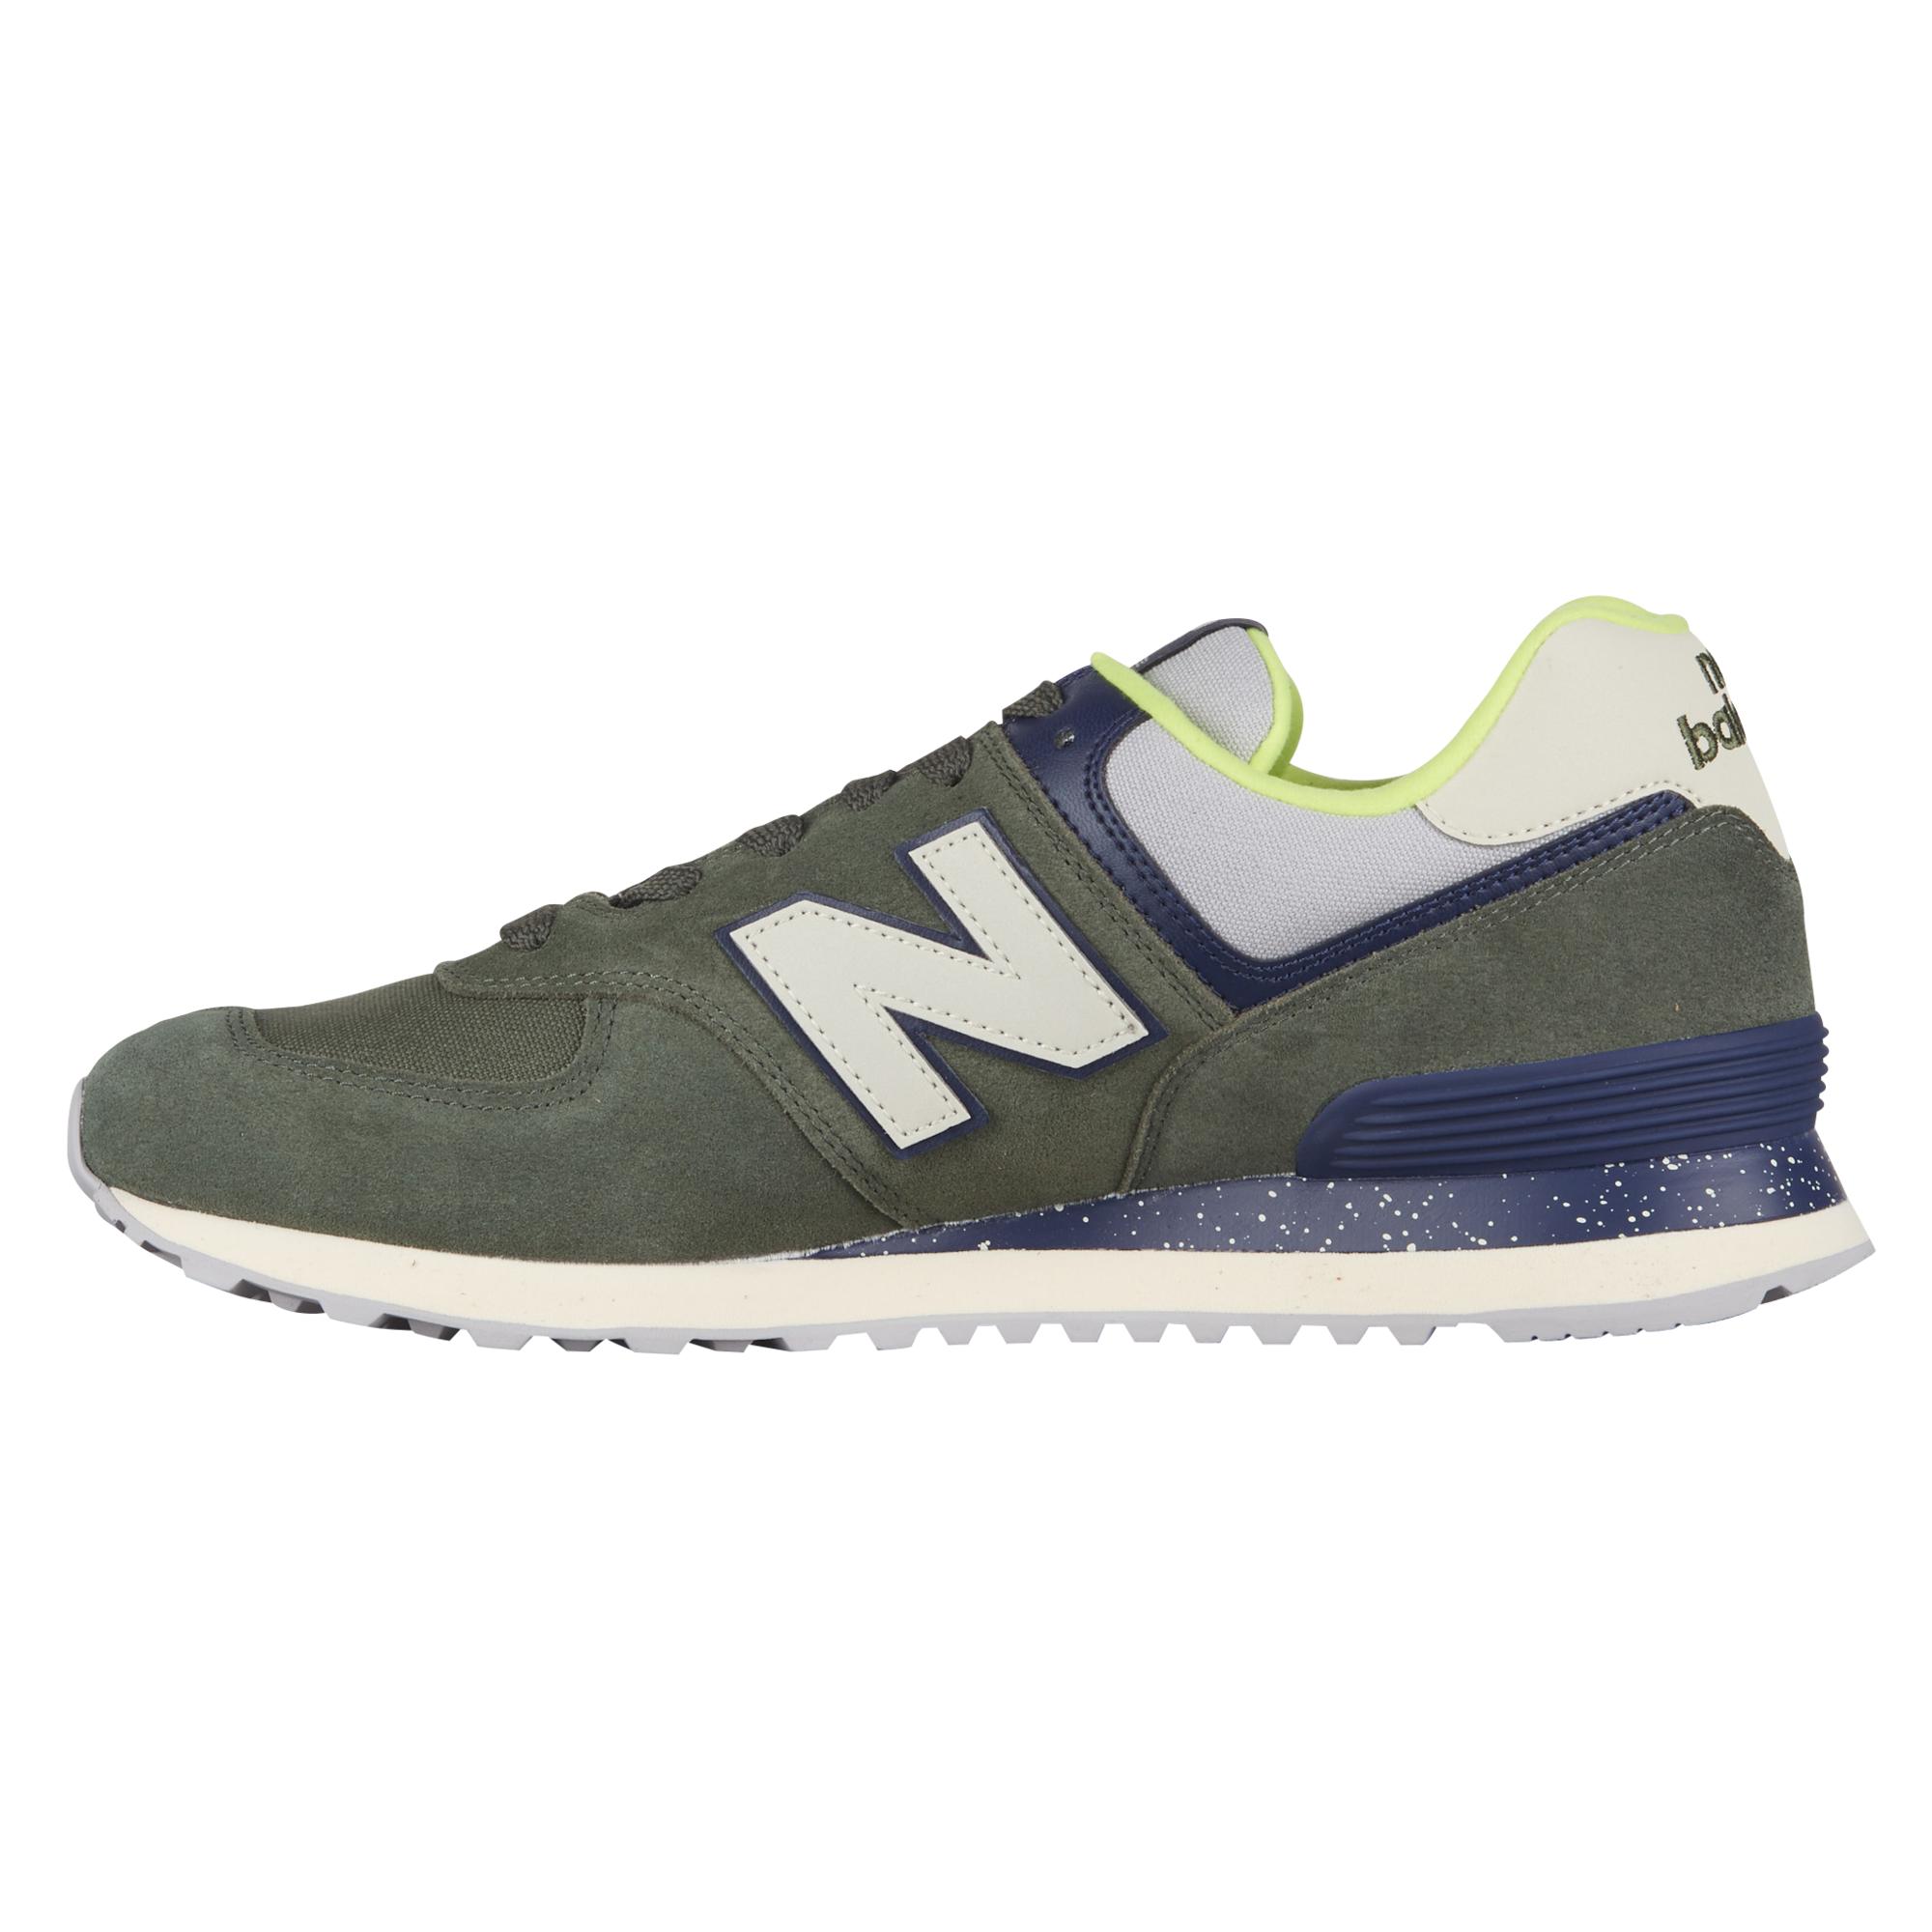 New Balance Leather 574 Classic Running Shoes in Green for Men - Lyst